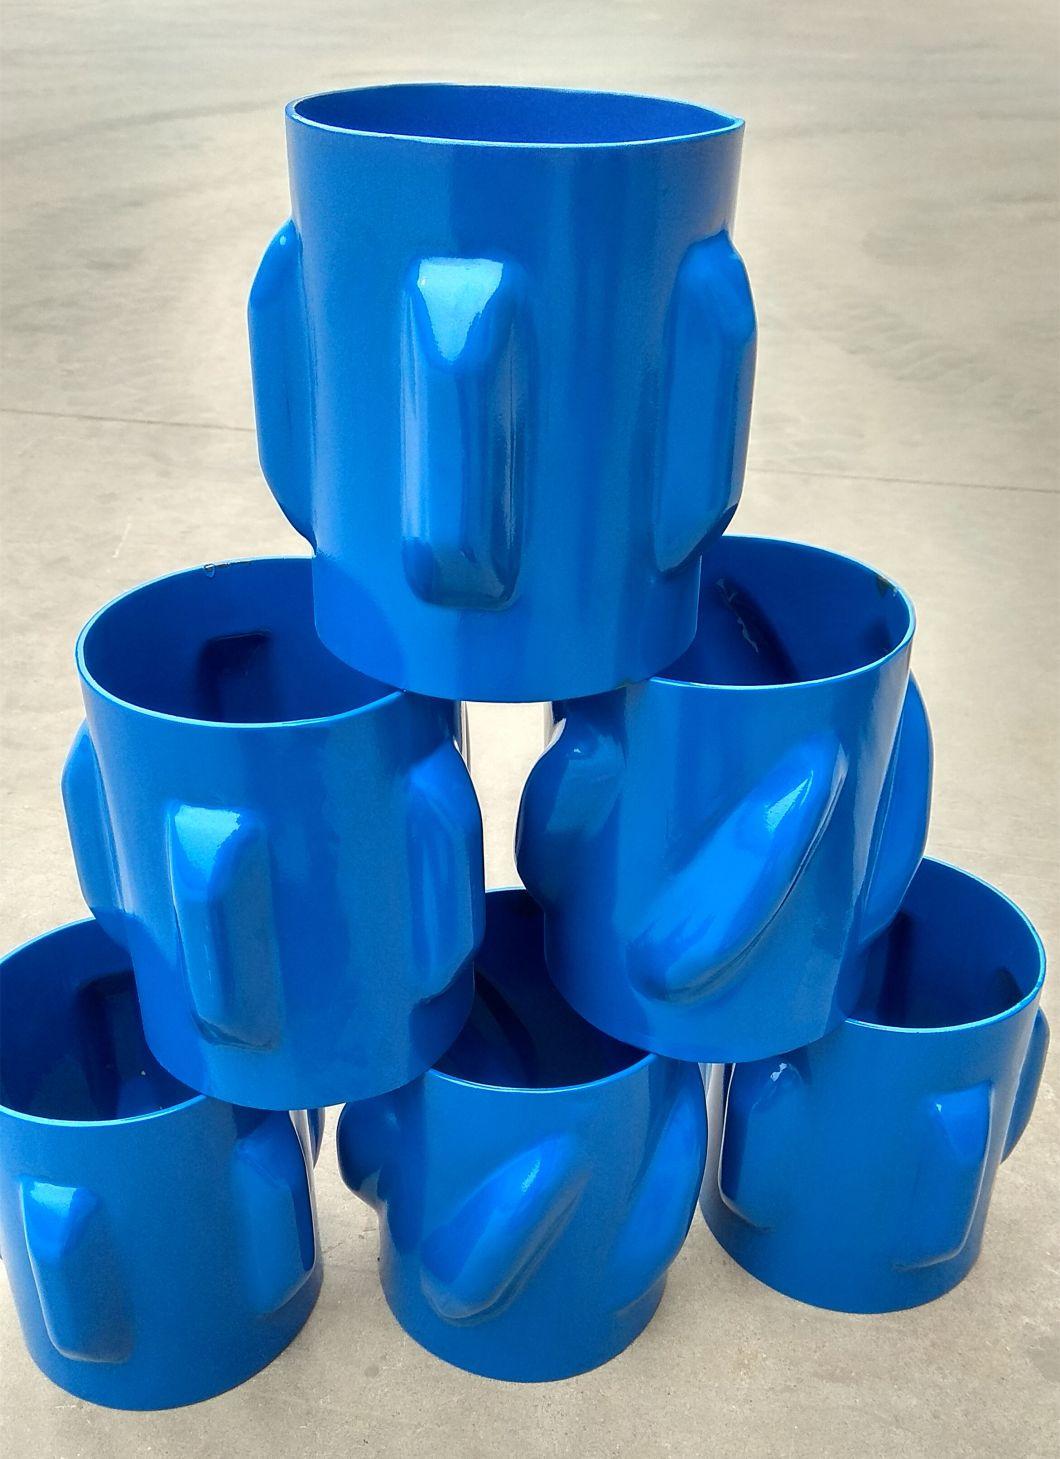 Casing Bow Spring Centralizer